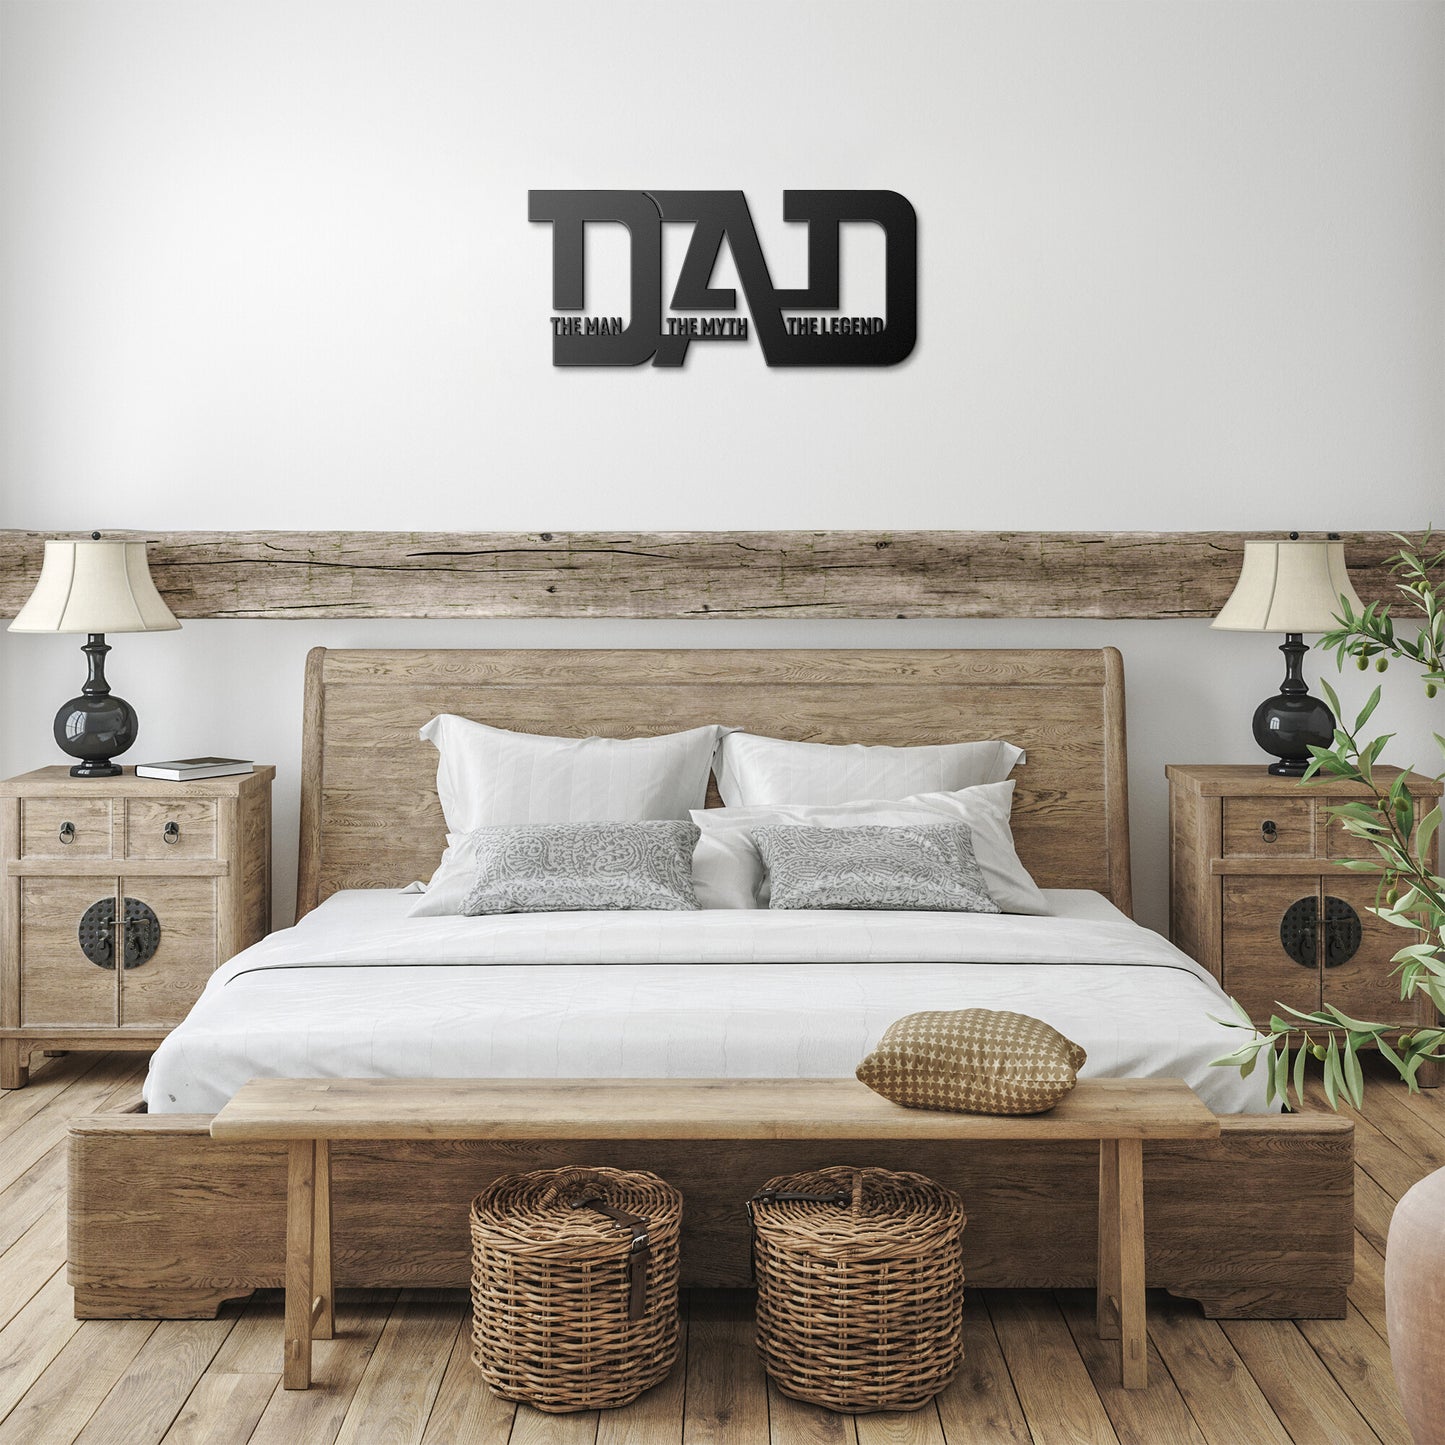 Dad | The Man, The Myth, The Legend Metal Wall Art